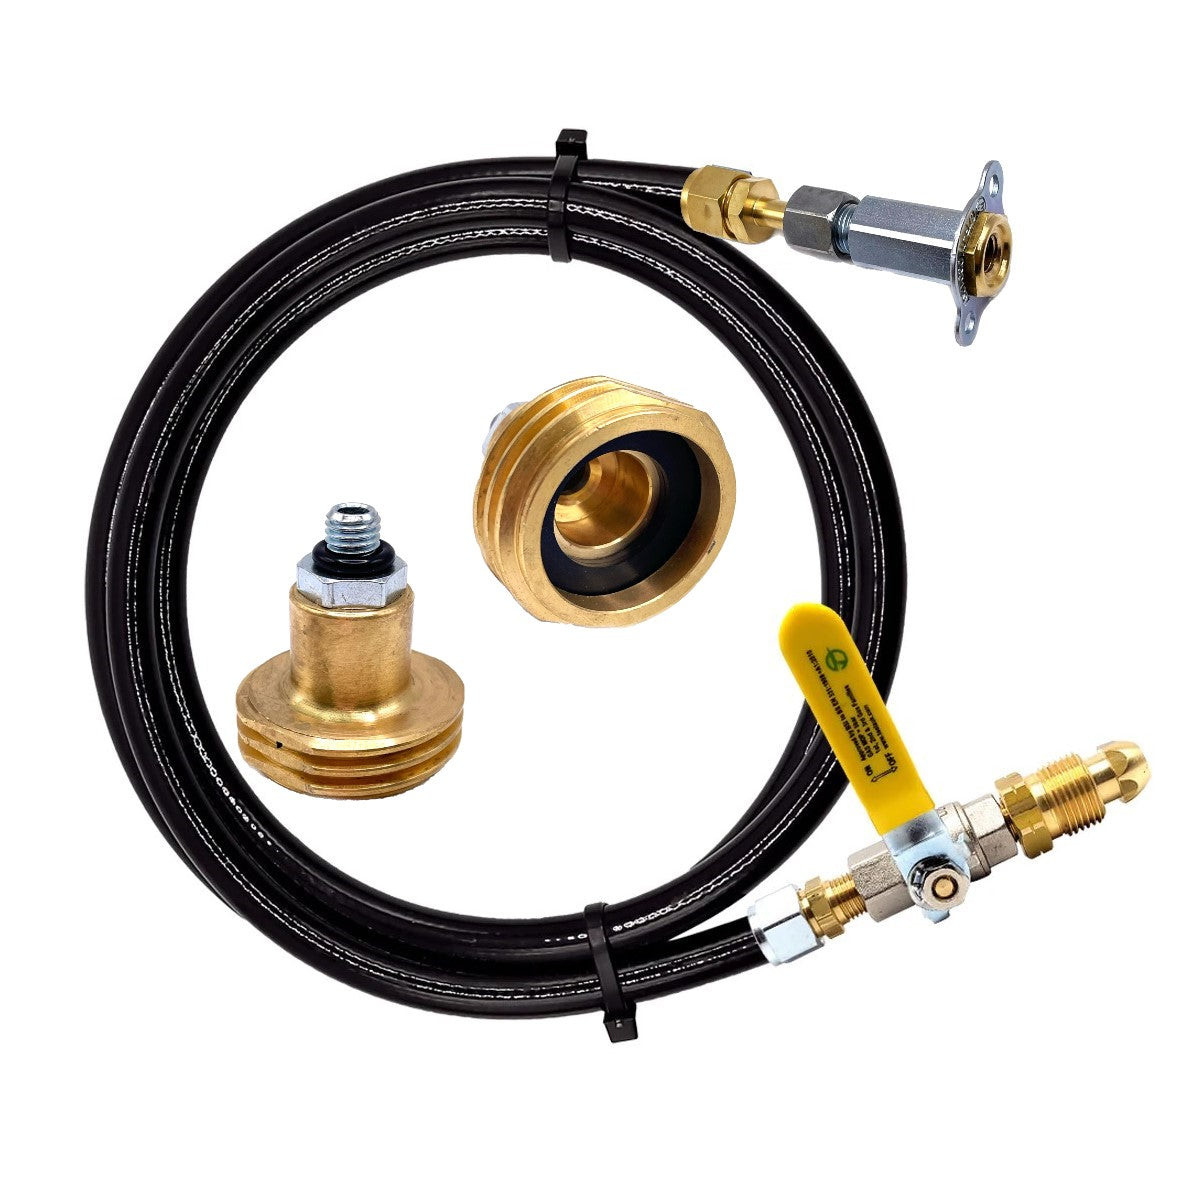 EU gas cylinder connection kit - Gas Accessories 